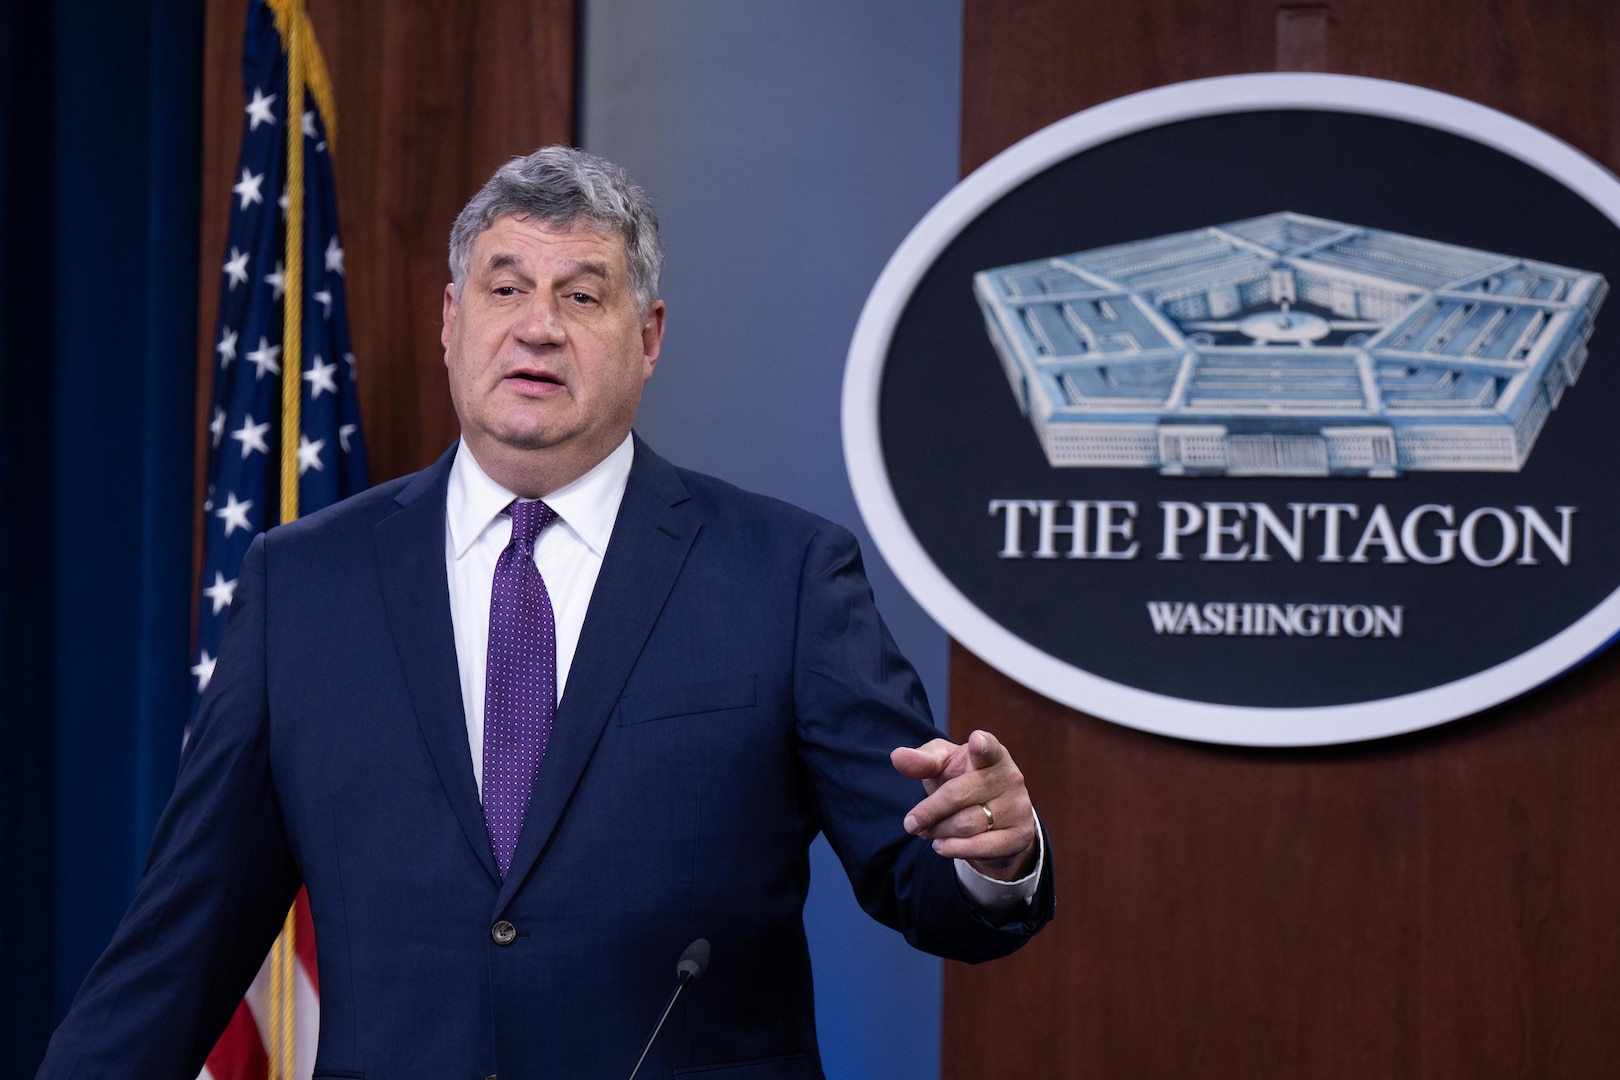 A man in a suit gestures as he stands behind a microphone. The sign behind him indicates that he is at the Pentagon.